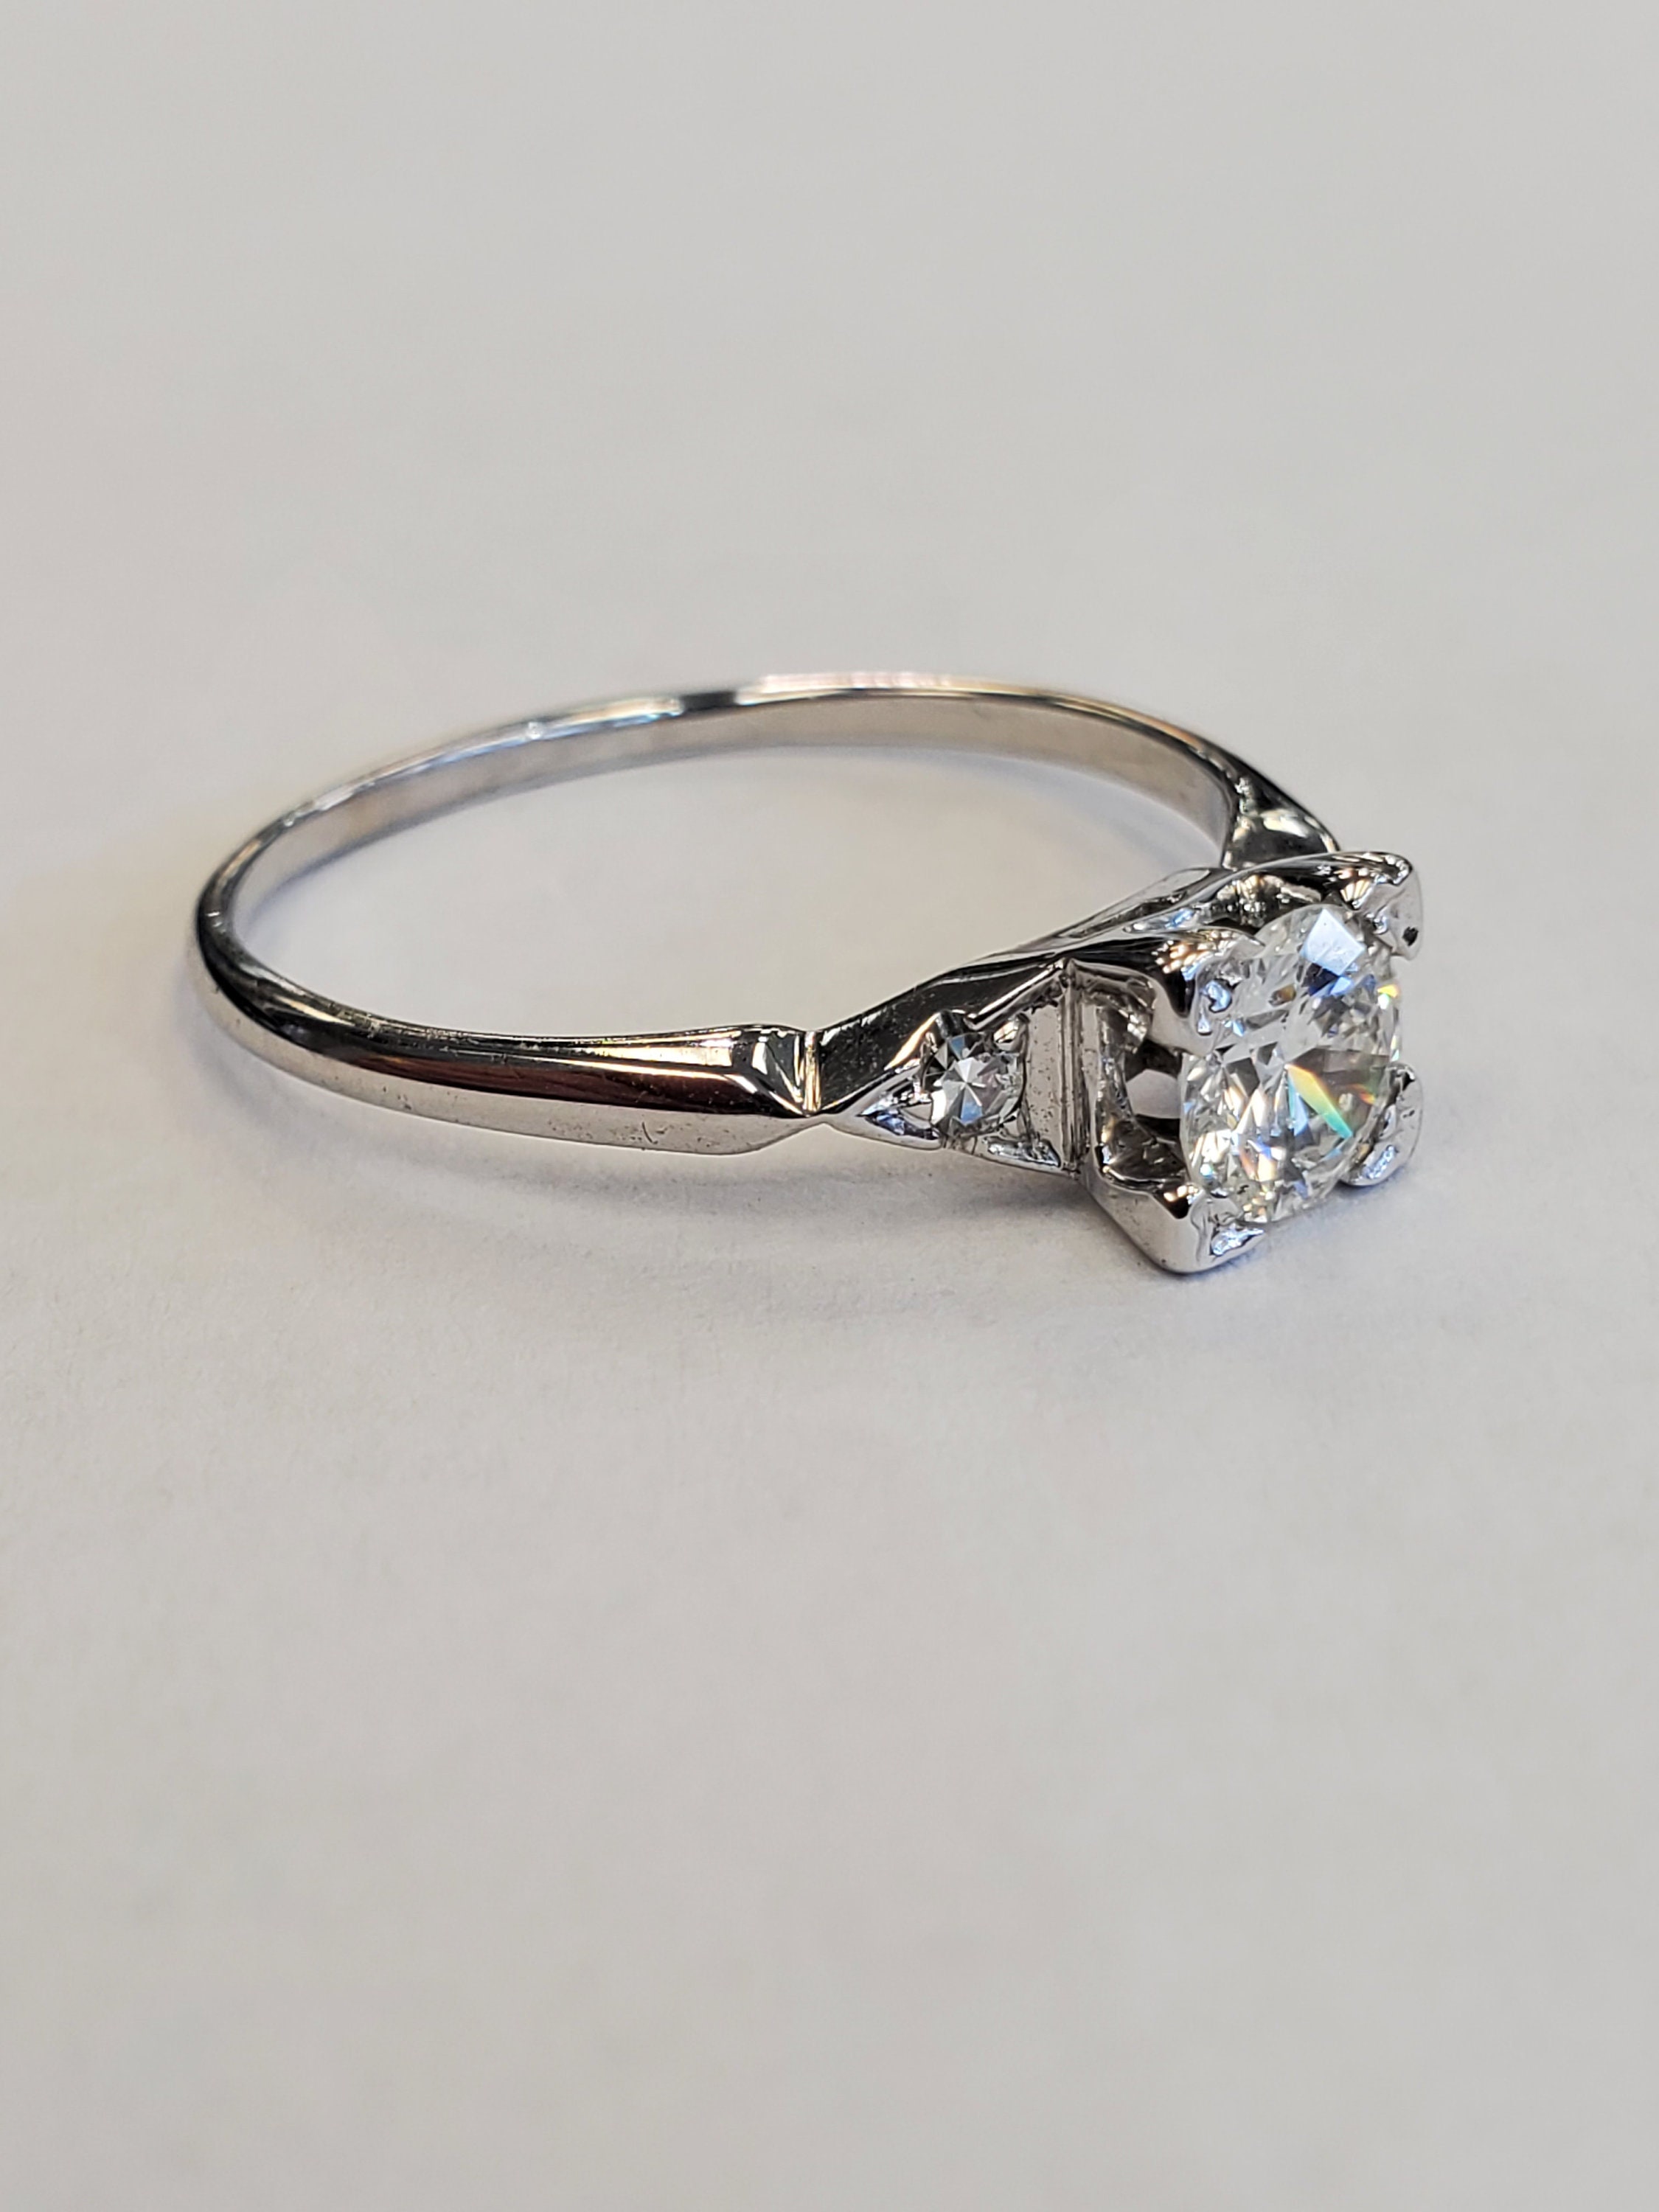 Product Image for Round Brilliant Diamond .60ct in 14k White Gold Vintage Ring Size 8.75